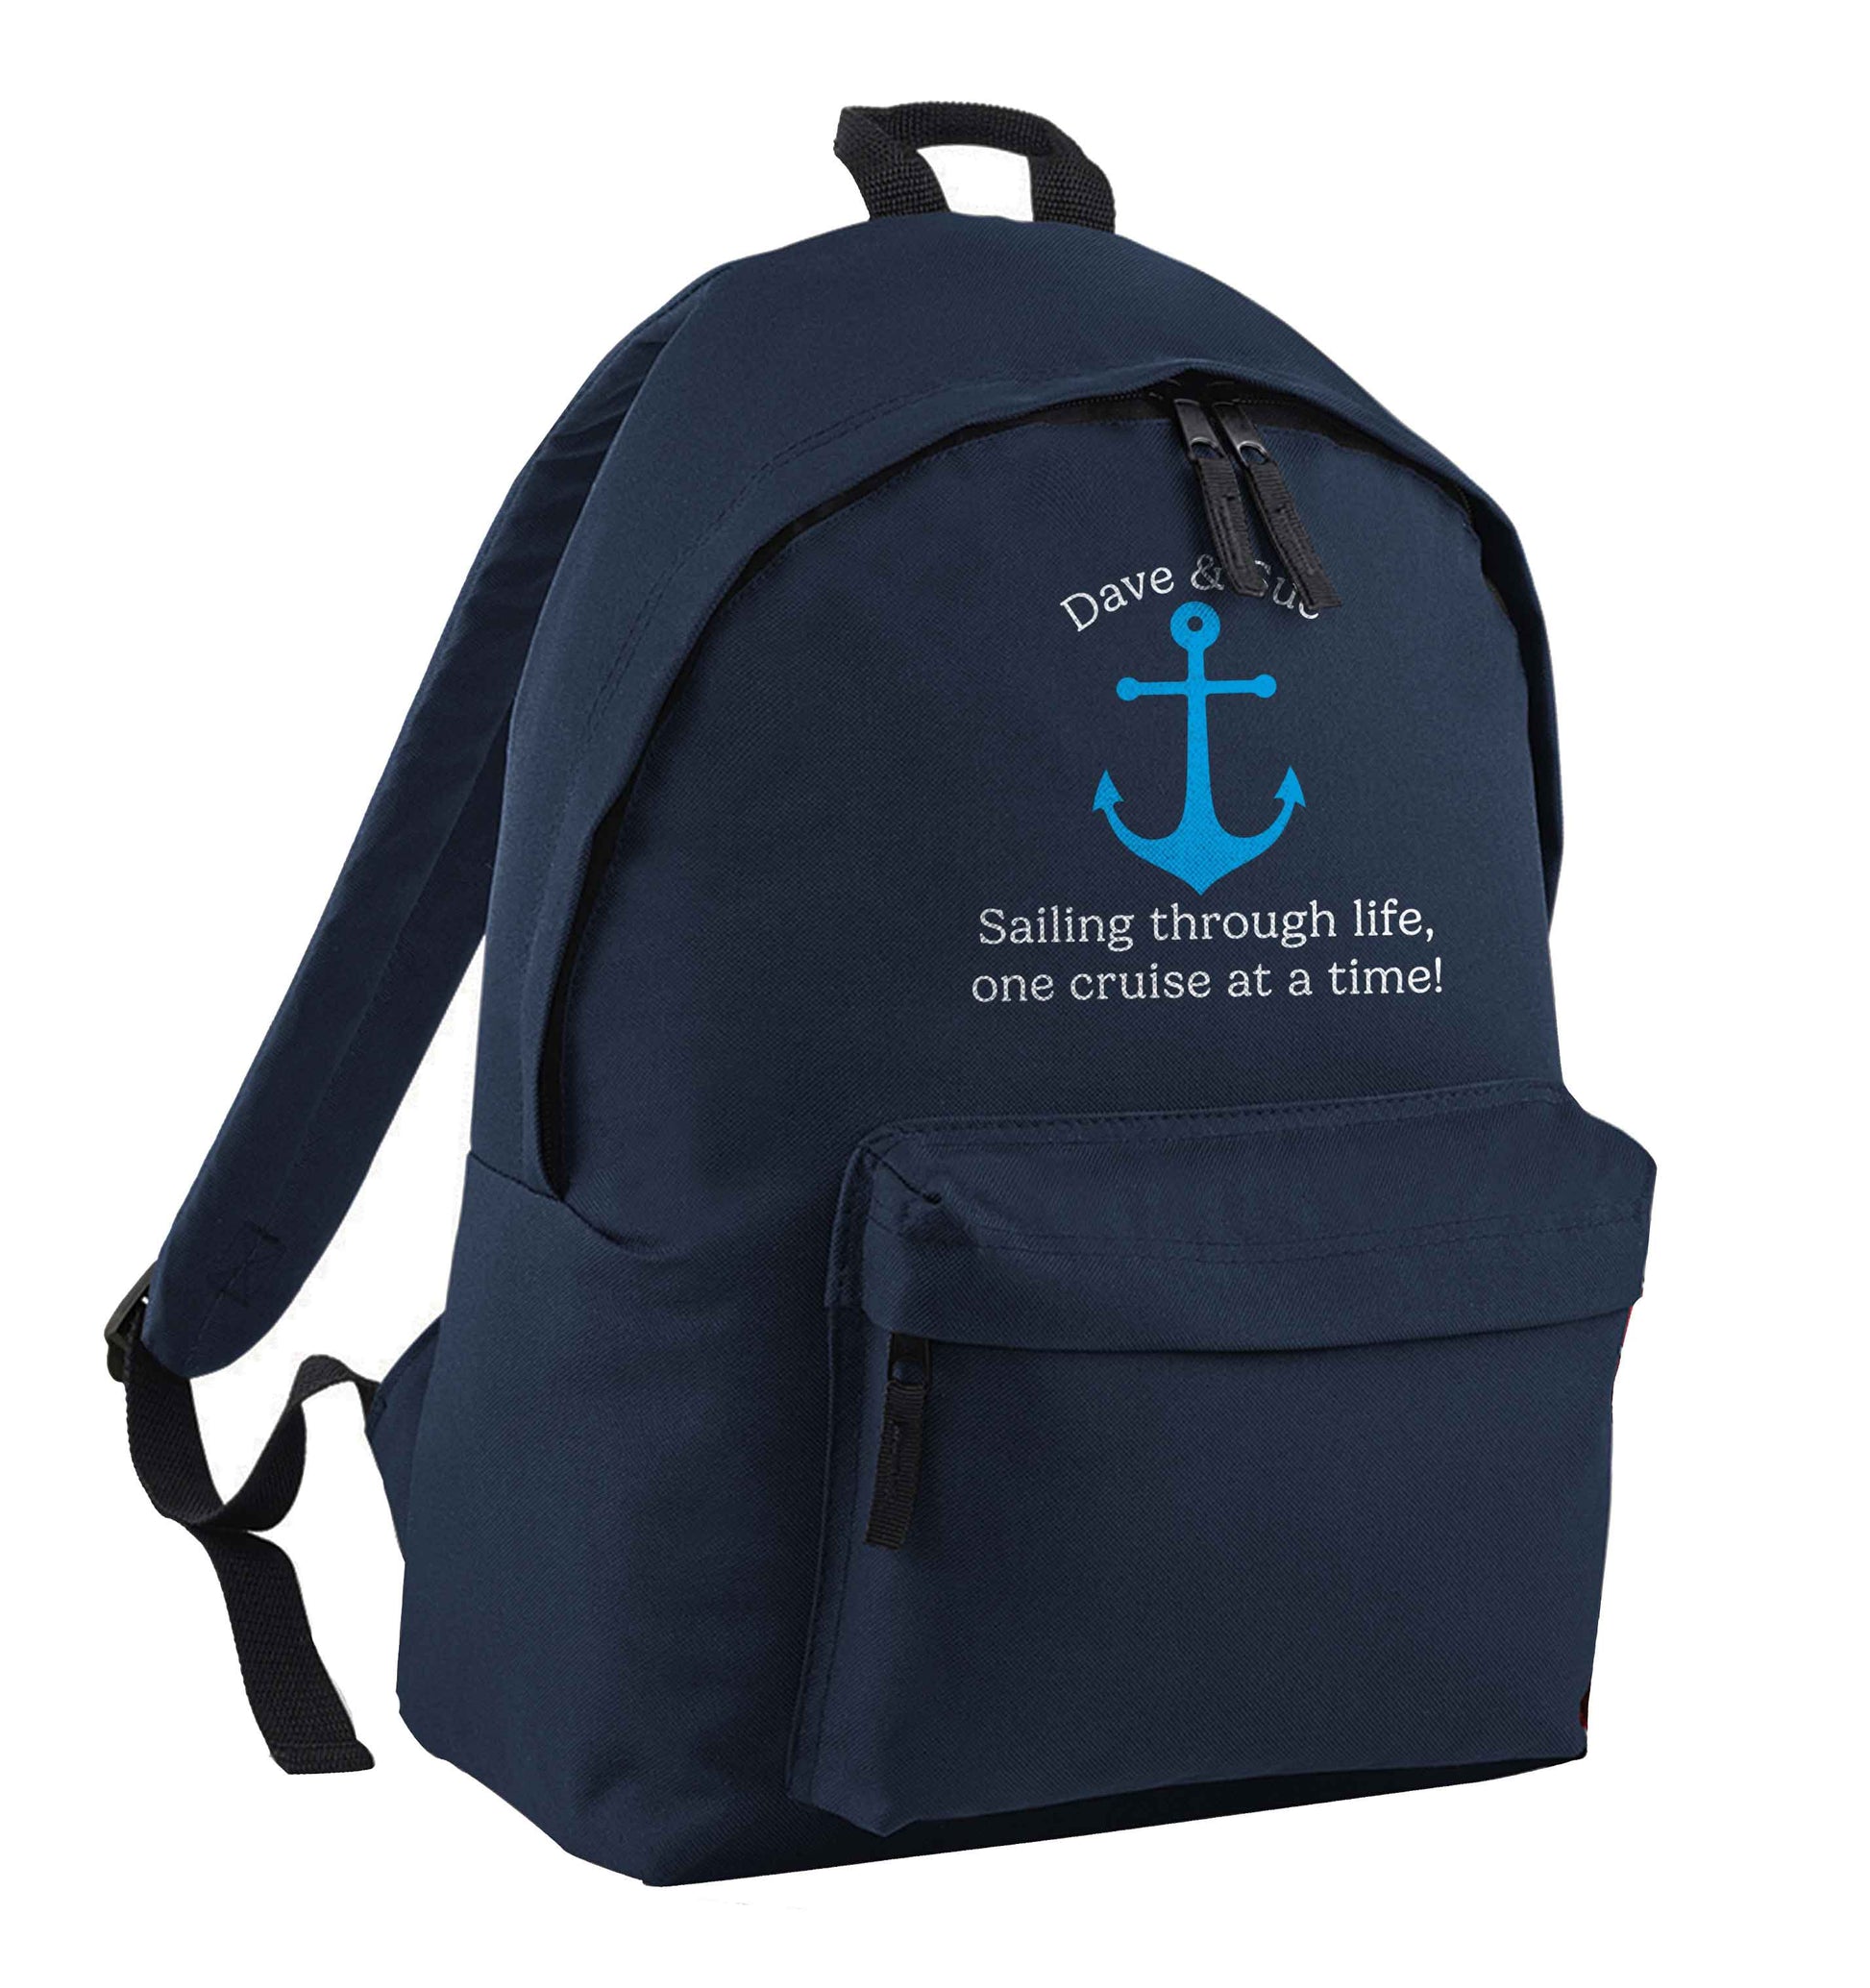 Sailing through life one cruise at a time - personalised navy adults backpack